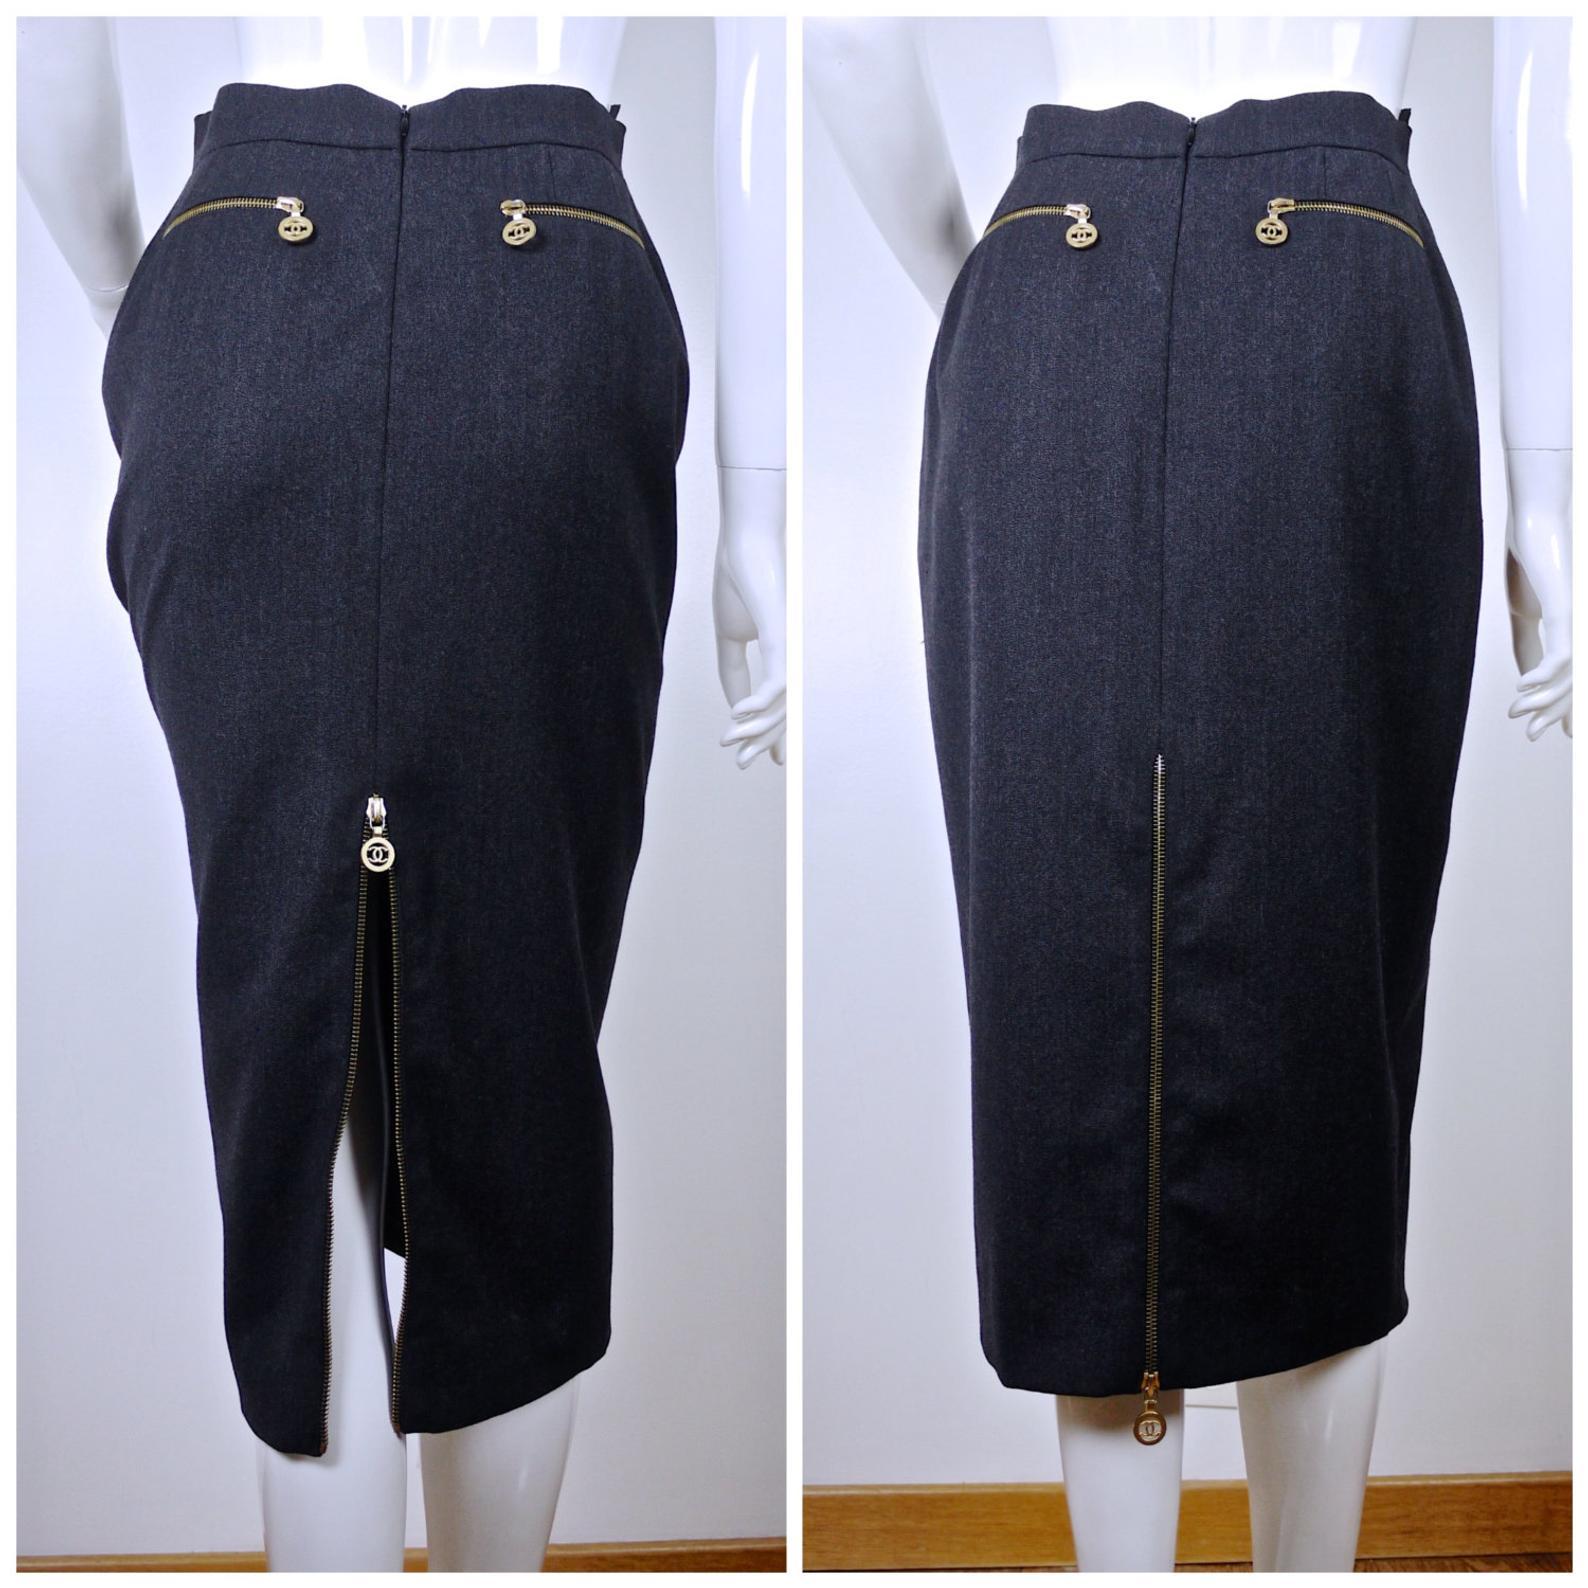 Vintage RARE CHANEL CC Medallion Zippered Pencil Skirt

Measurements taken laid flat, please double waist and hips:
Waist: 13 inches
Hips: 18.5 inches
Length: 29.5 inches

Features:
- 100% Authentic CHANEL.
- Dark gray pencil cut skirt.
- Horizontal